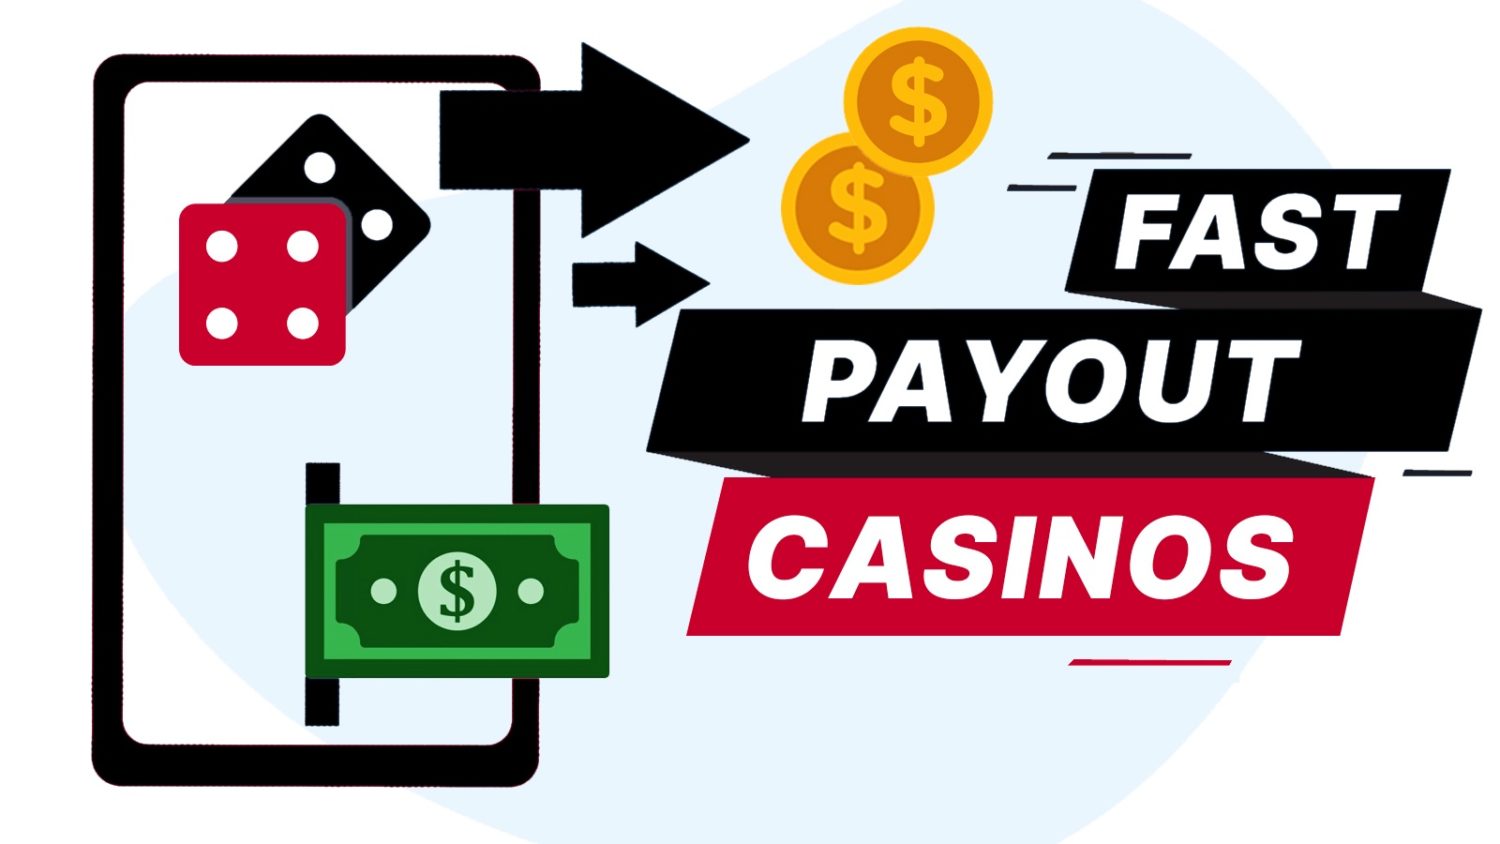 Fast payouts